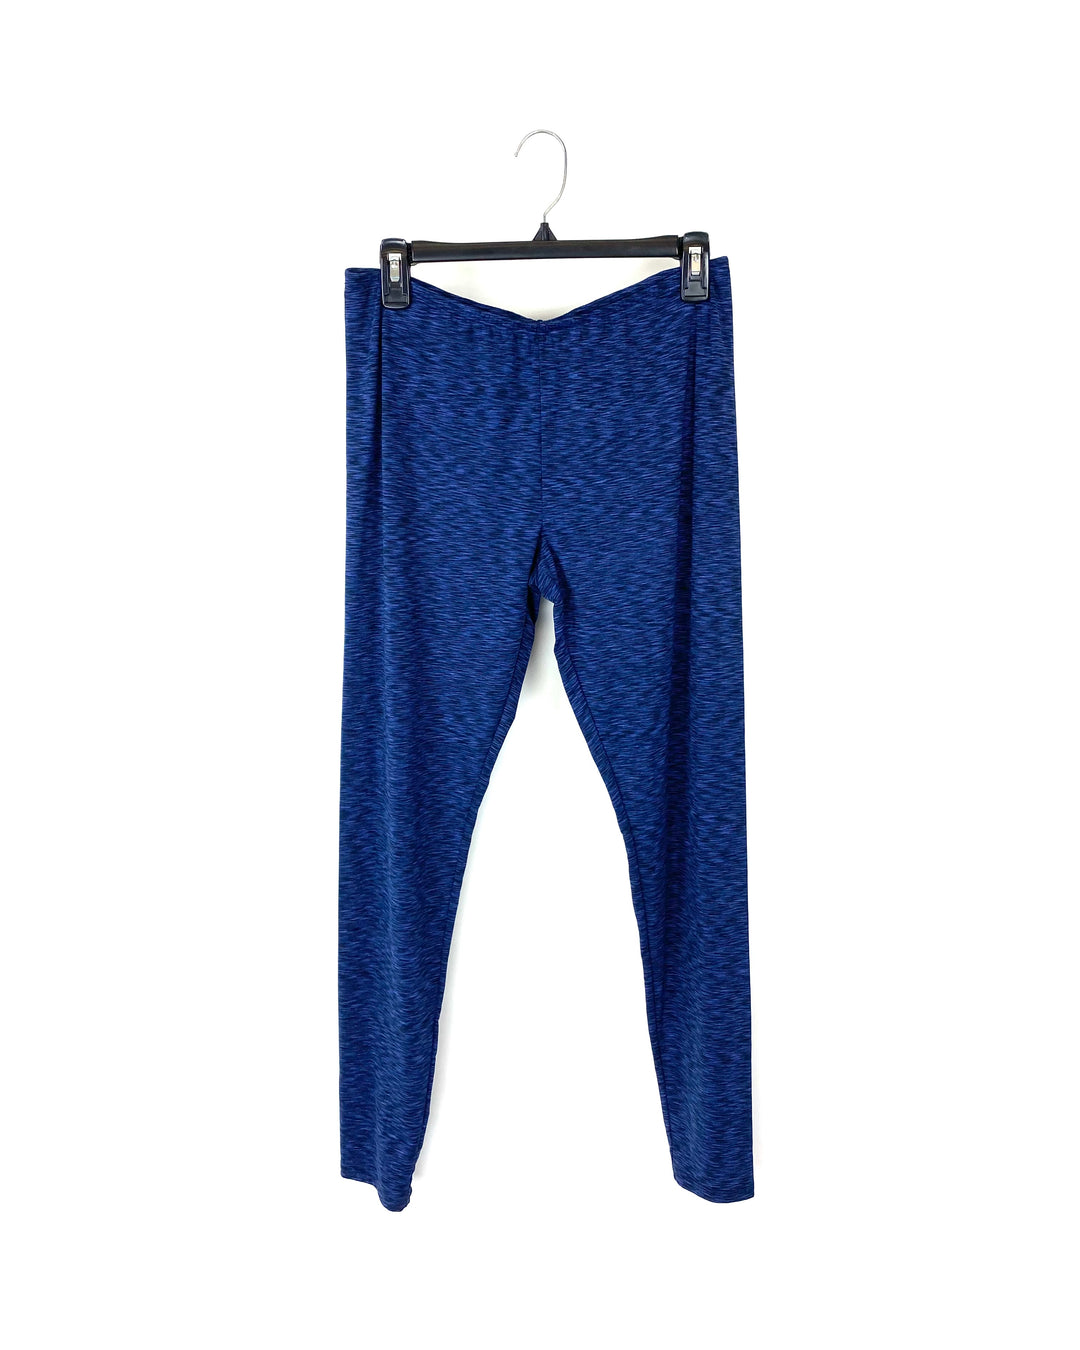 Black and Blue Heather Leggings - Size 10/12